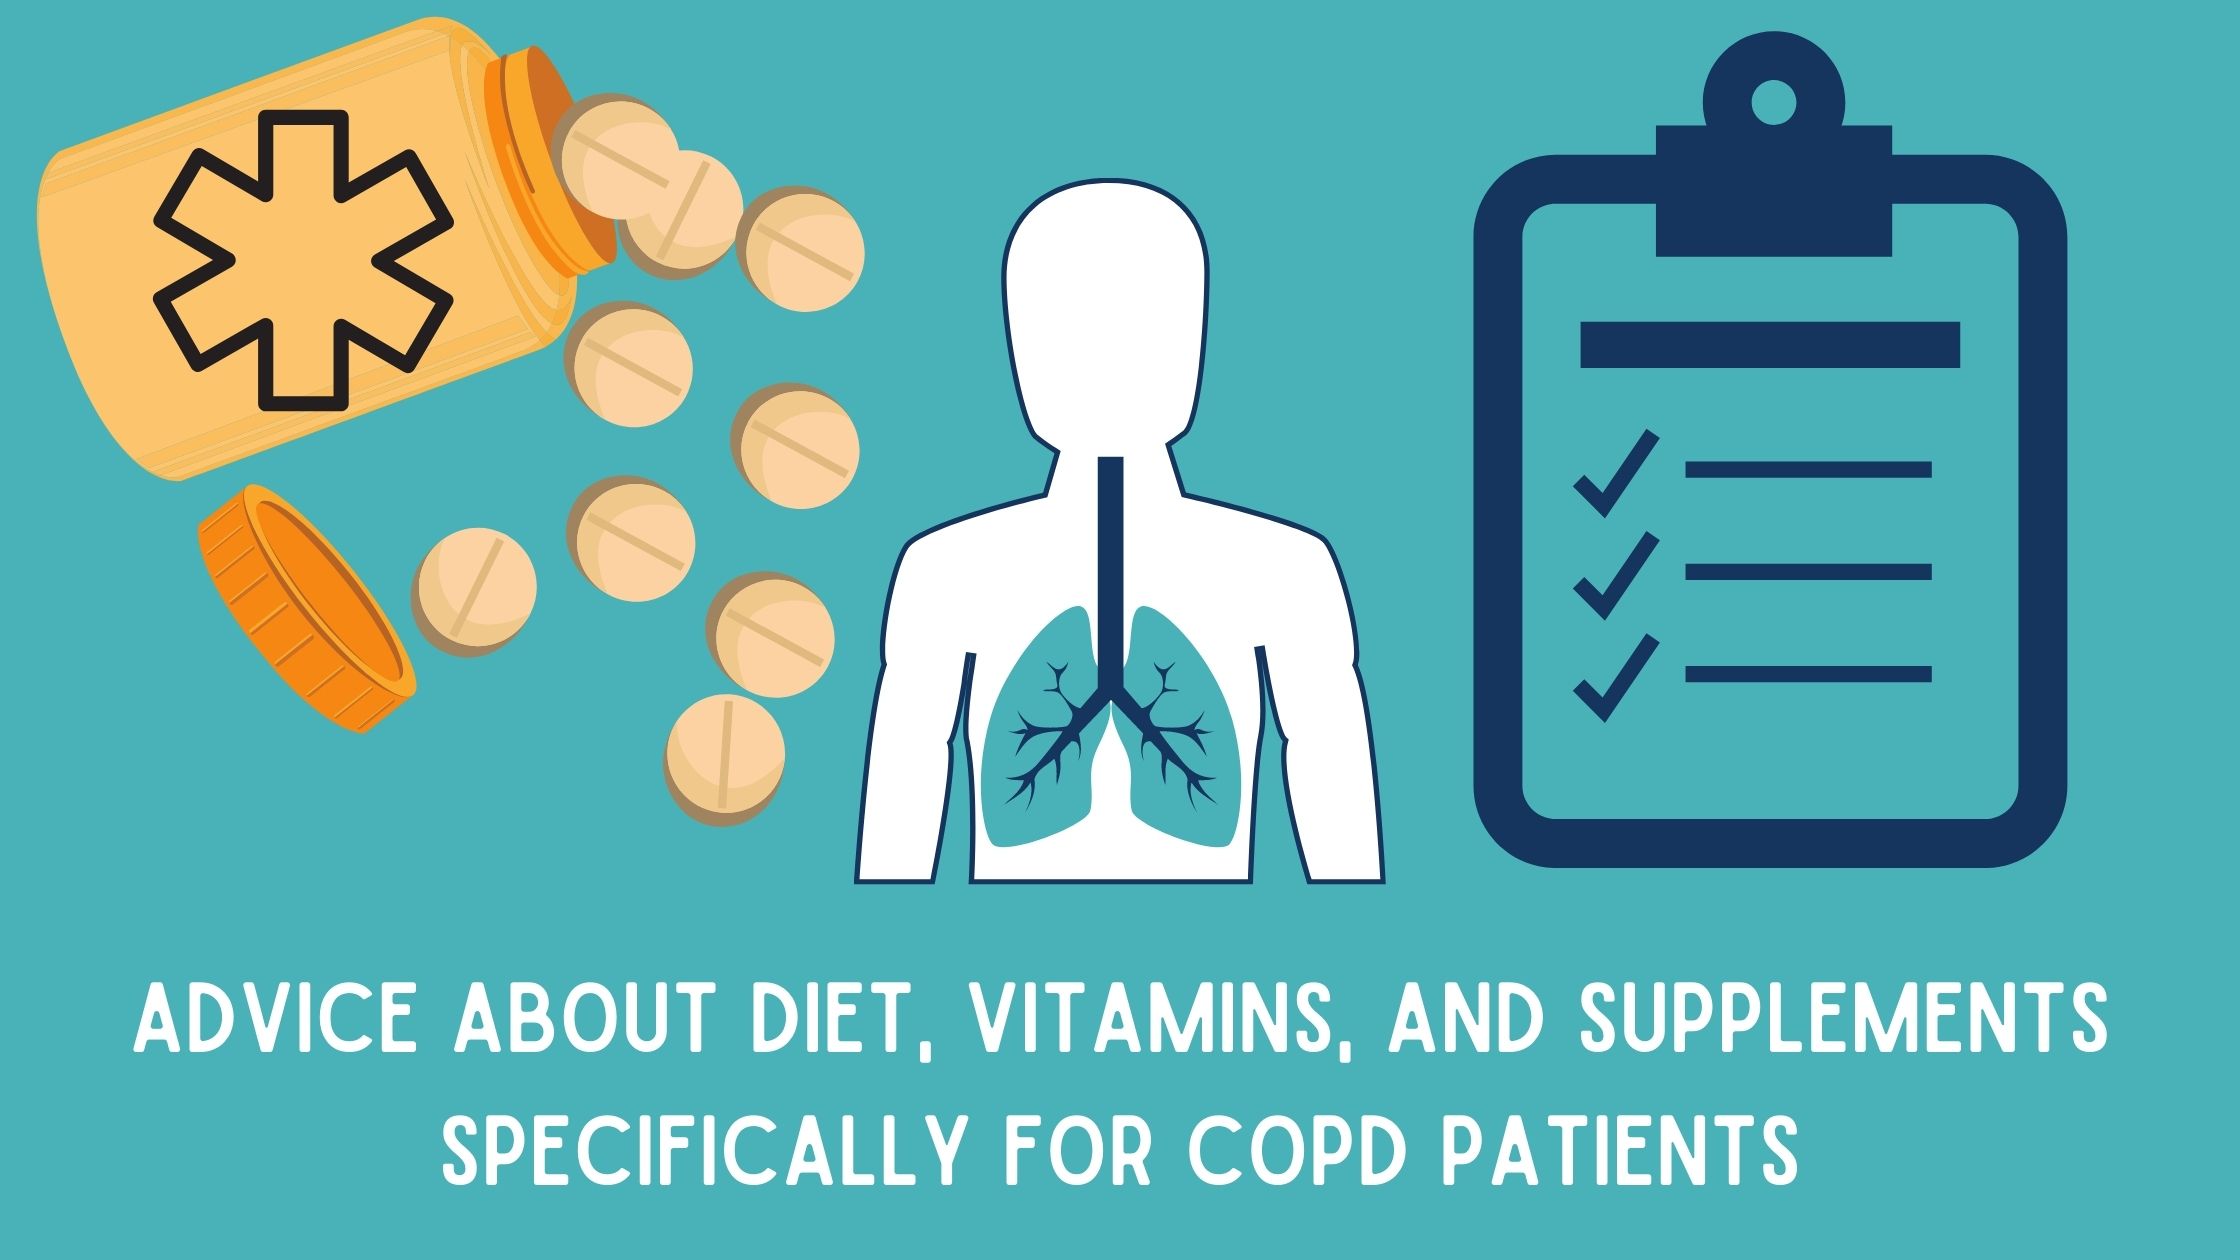 Advice about Diet, Vitamins, and Supplements Specifically for COPD Patients